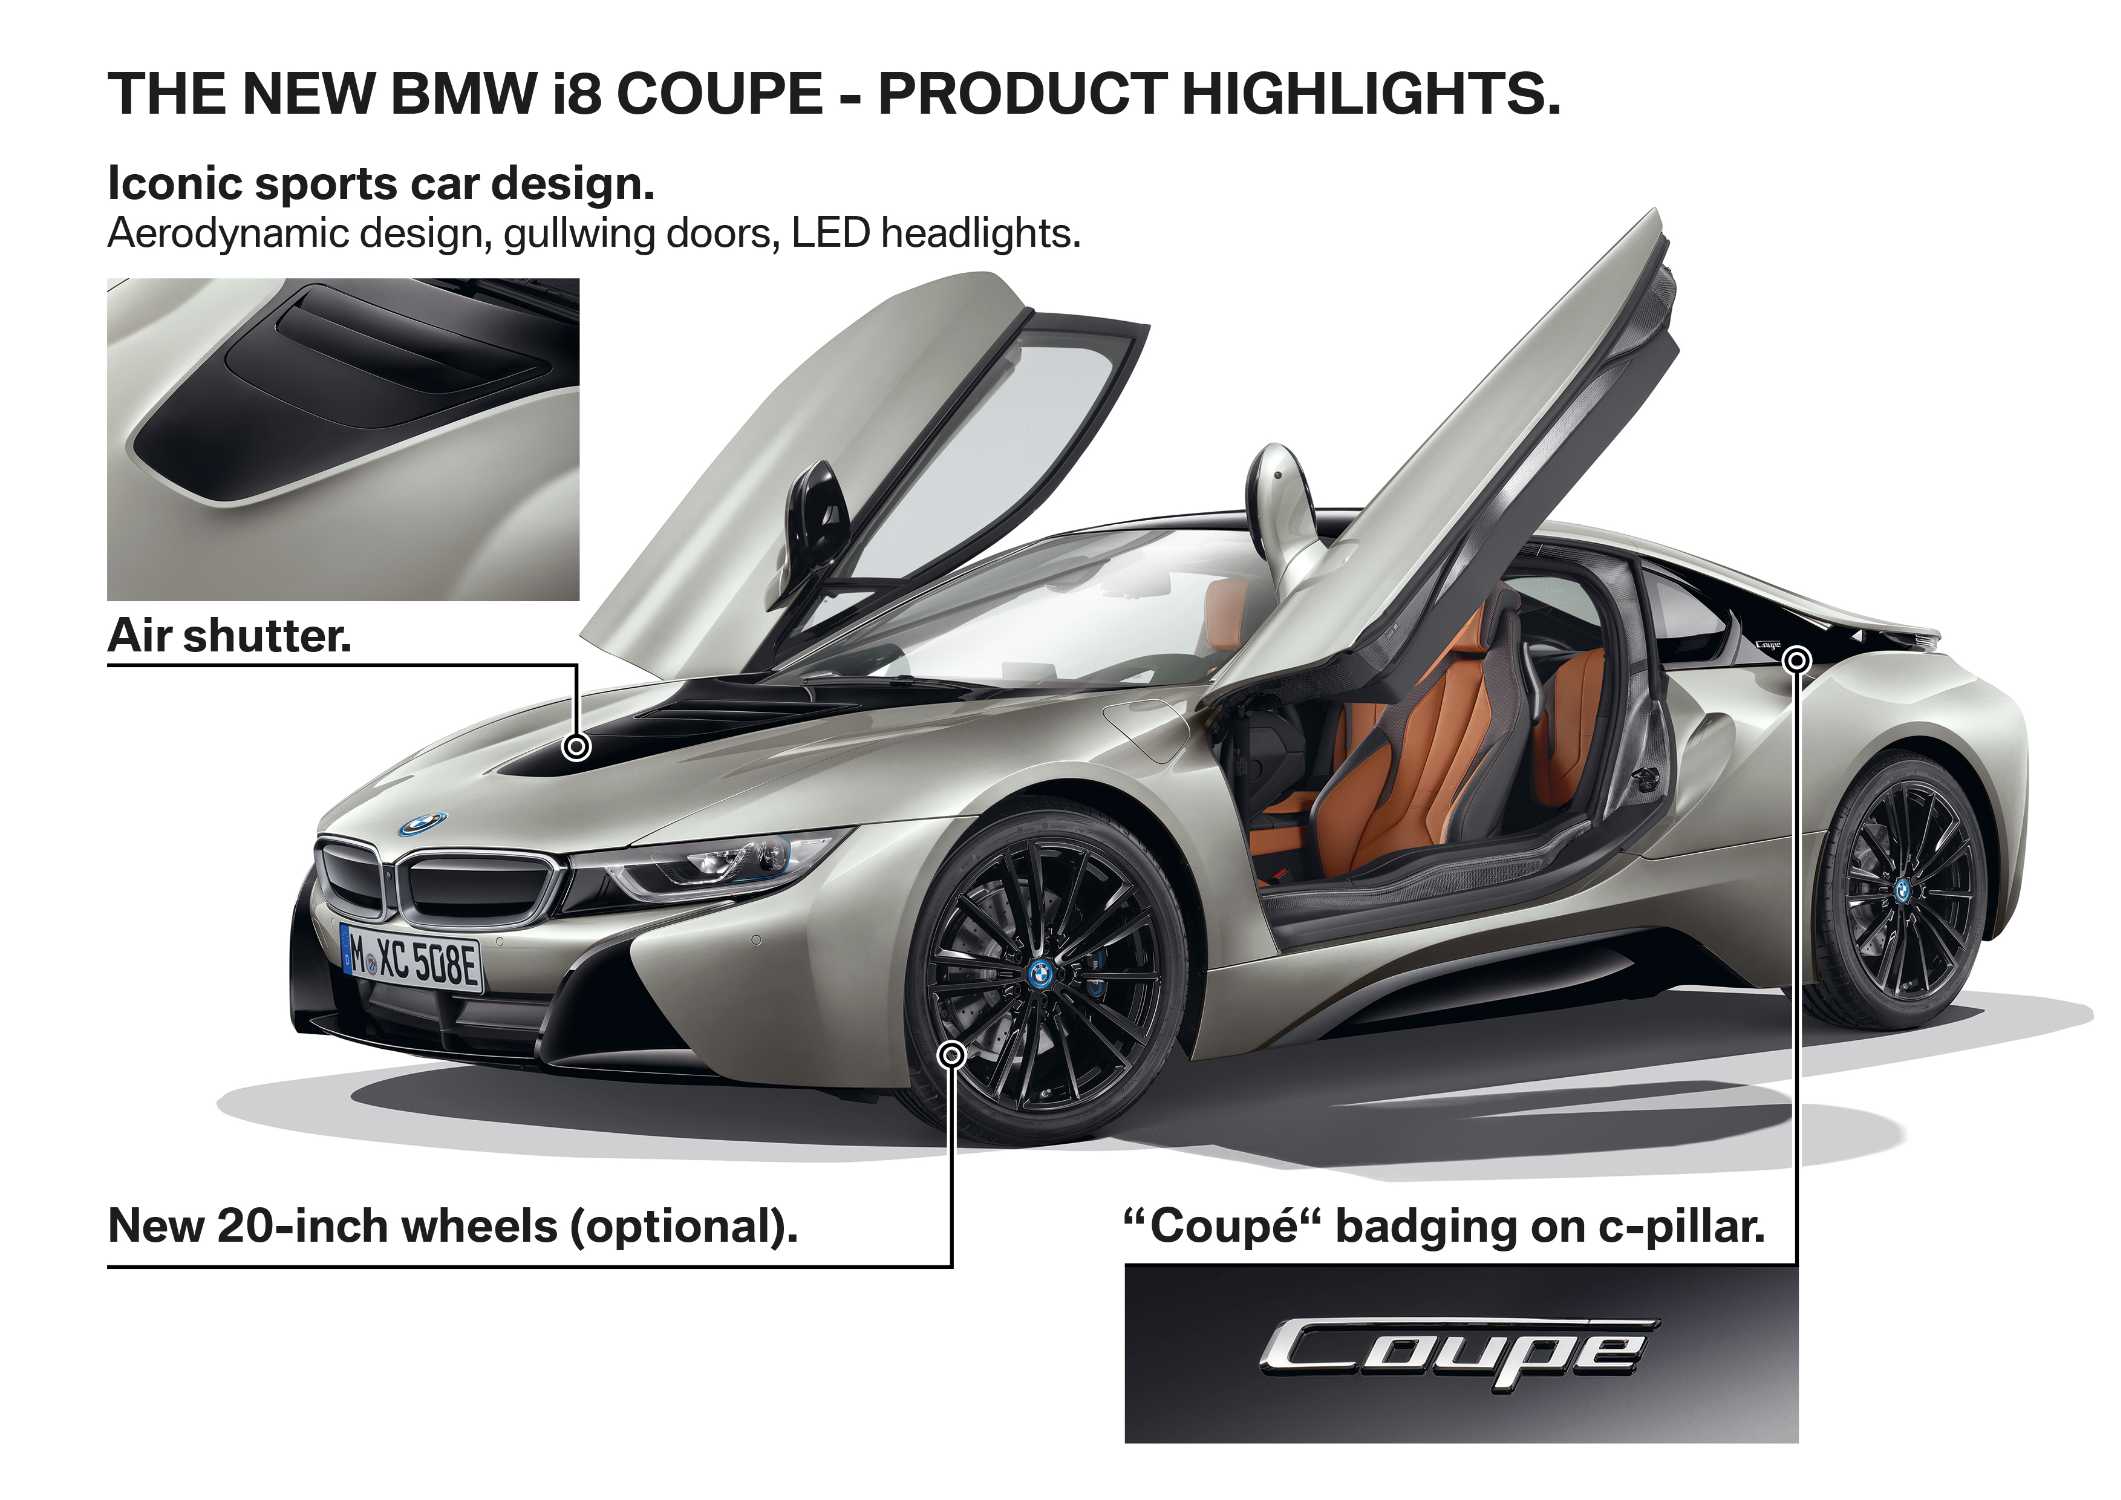 The new BMW i8 Coupe - Product Highlights. (11/2017)